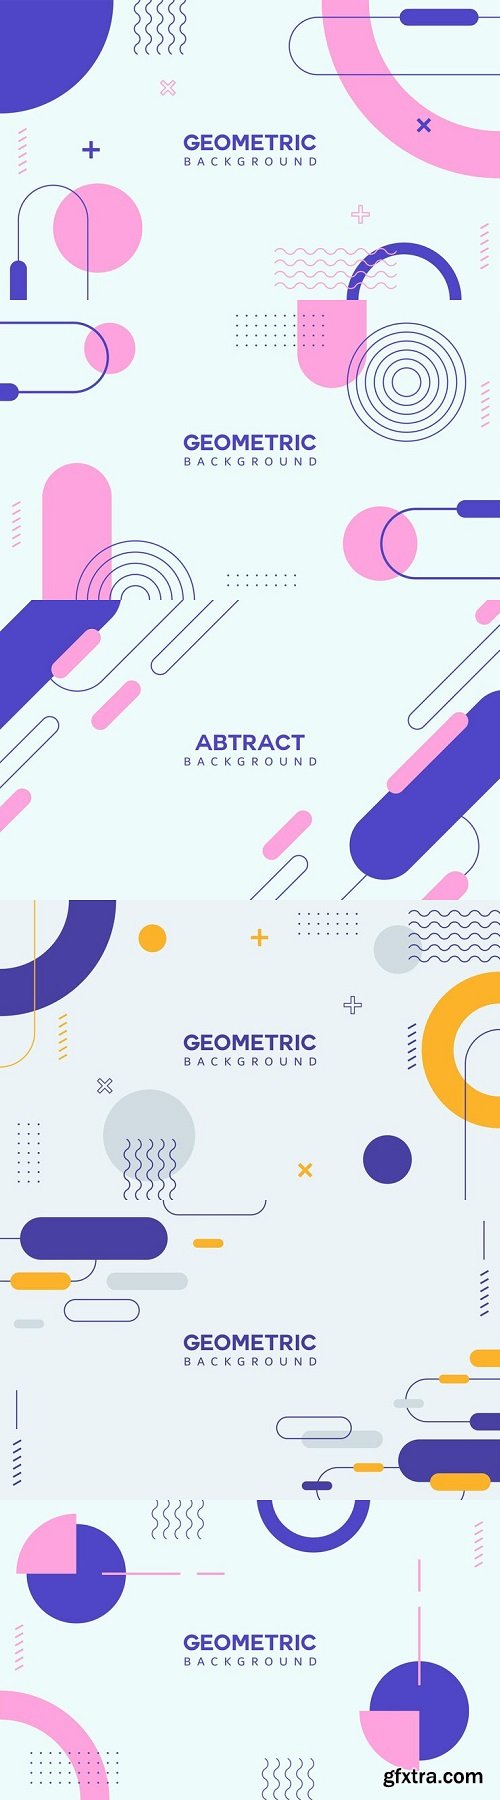 Geometric abstract background in minimal style